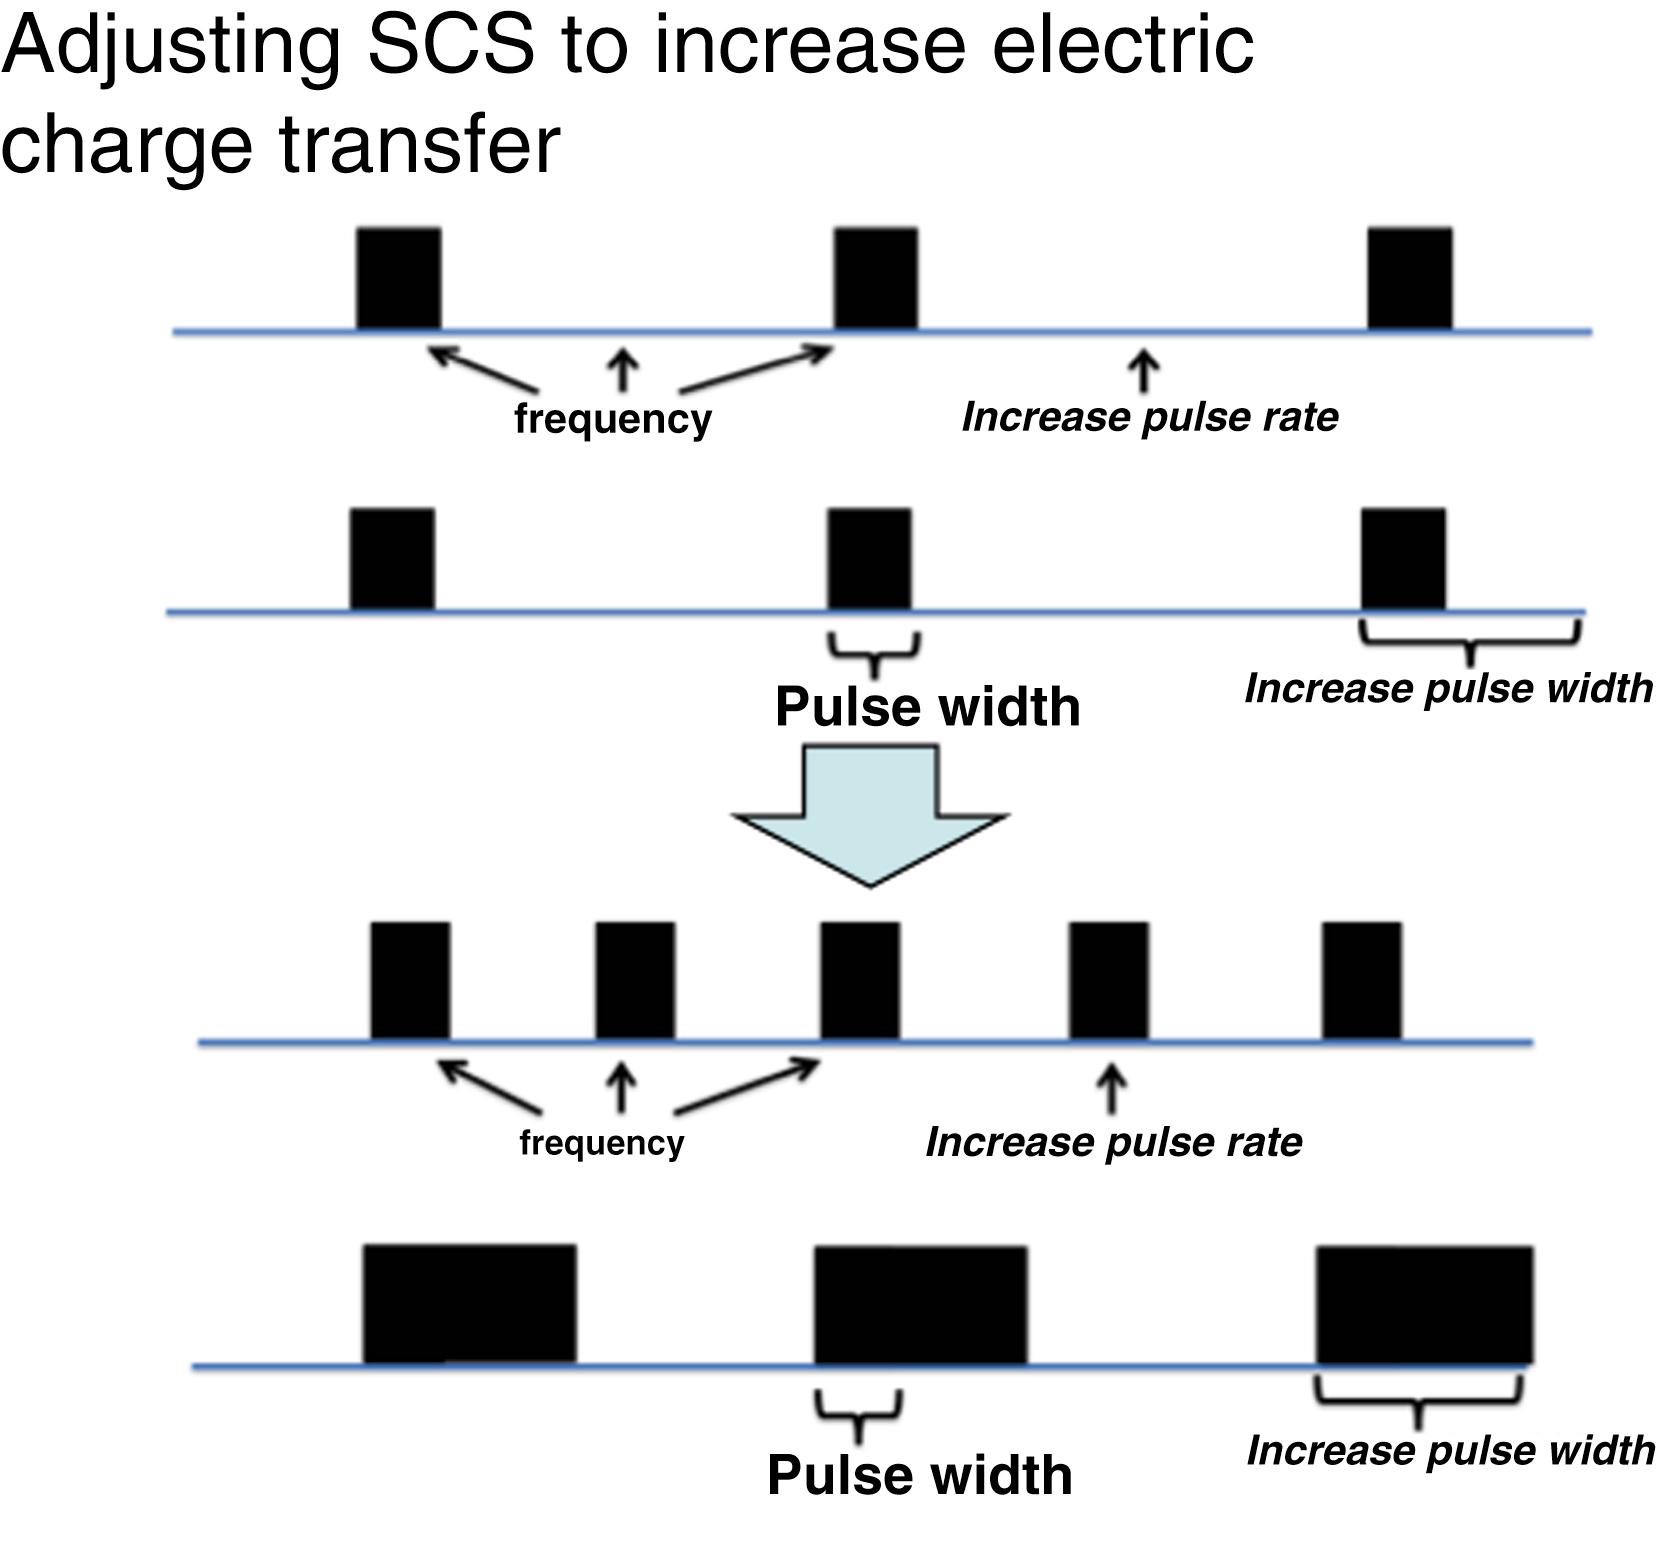 FIGURE 119.6, Illustrates how merely increasing stimulation frequency and/or pulse duration can increase the amount or electric charge transmitted. There are at present several protocols proposed by different manufacturers how to enable transfer of larger electric charges without disturbing sensory effects to the patient. Most often the amplitude is below sensory threshold and the stimulation periods allowed to be longer than with older paradigms.